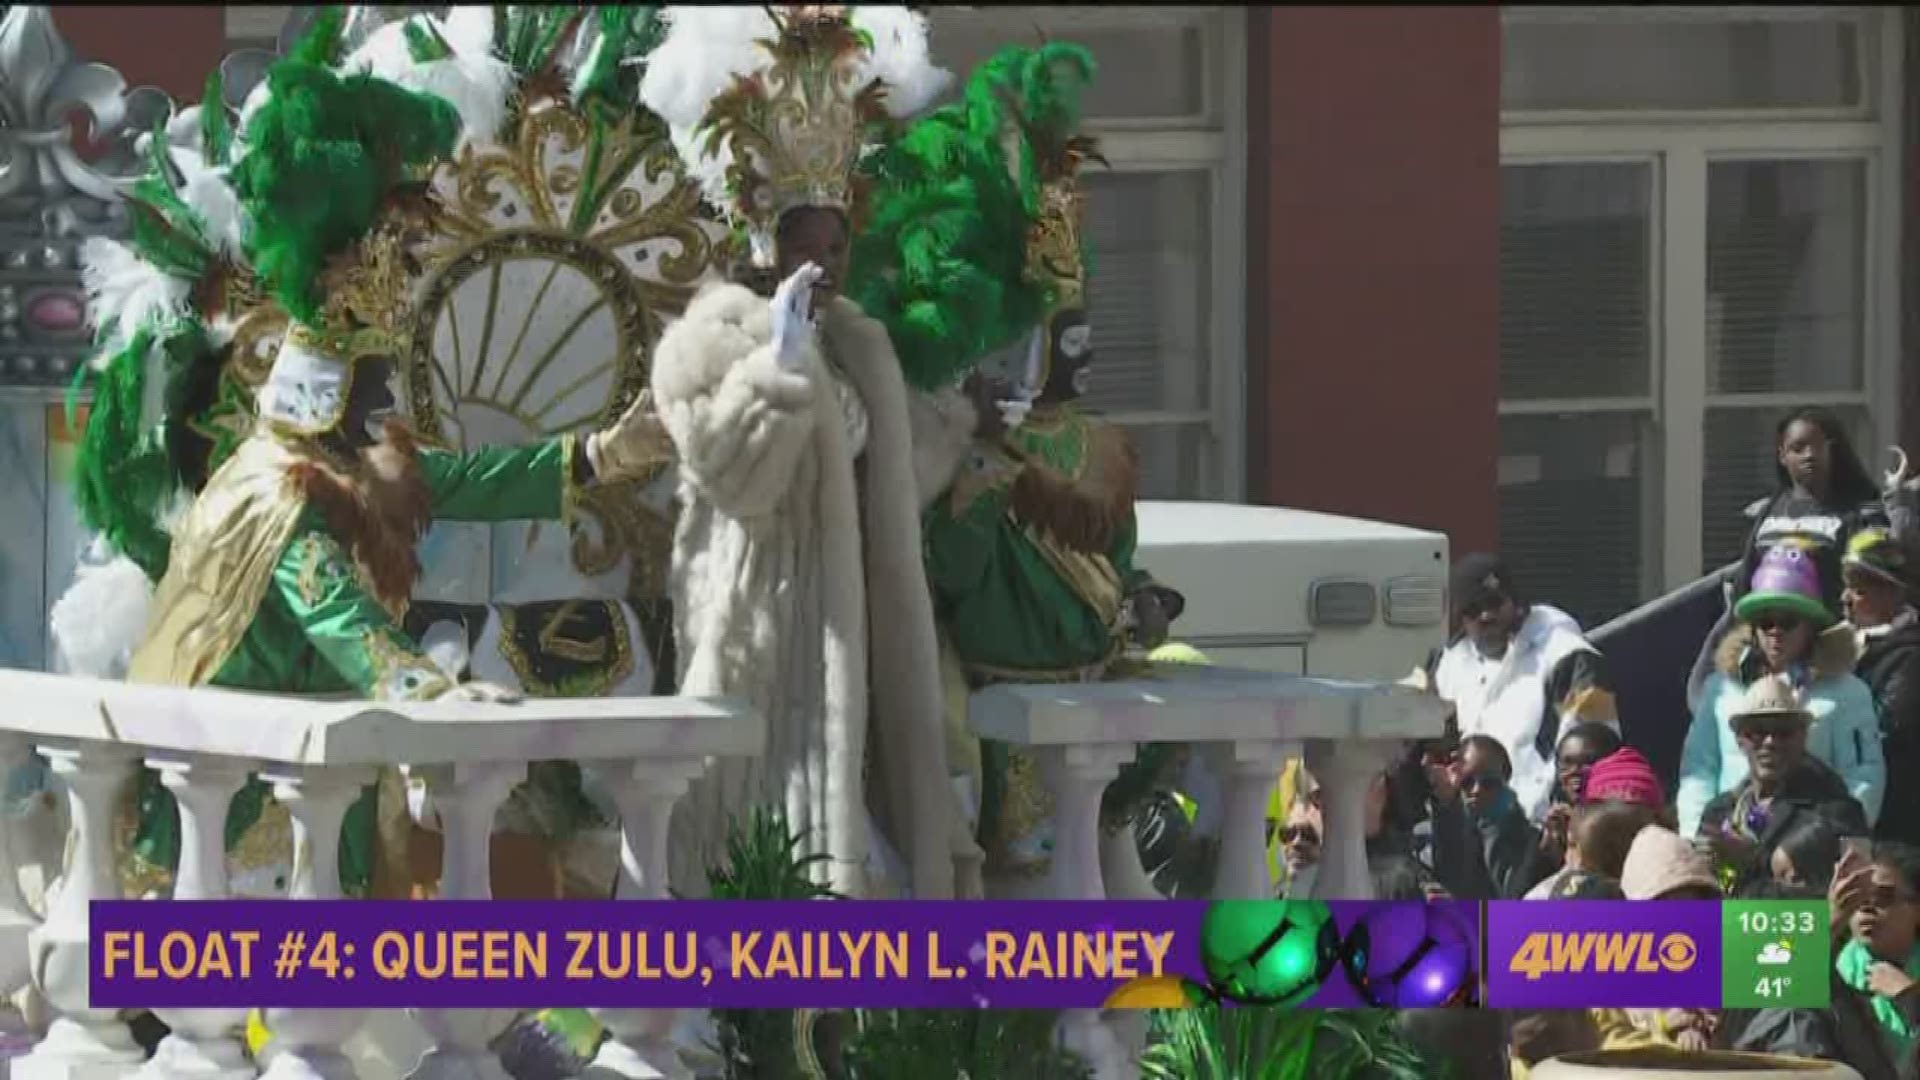 Queen Zulu 2019 , Kailyn L. Rainey, thanks the city of New Orleans for the love and support shown to her and her grandfather, George Rainey, who is King Zulu 2019.